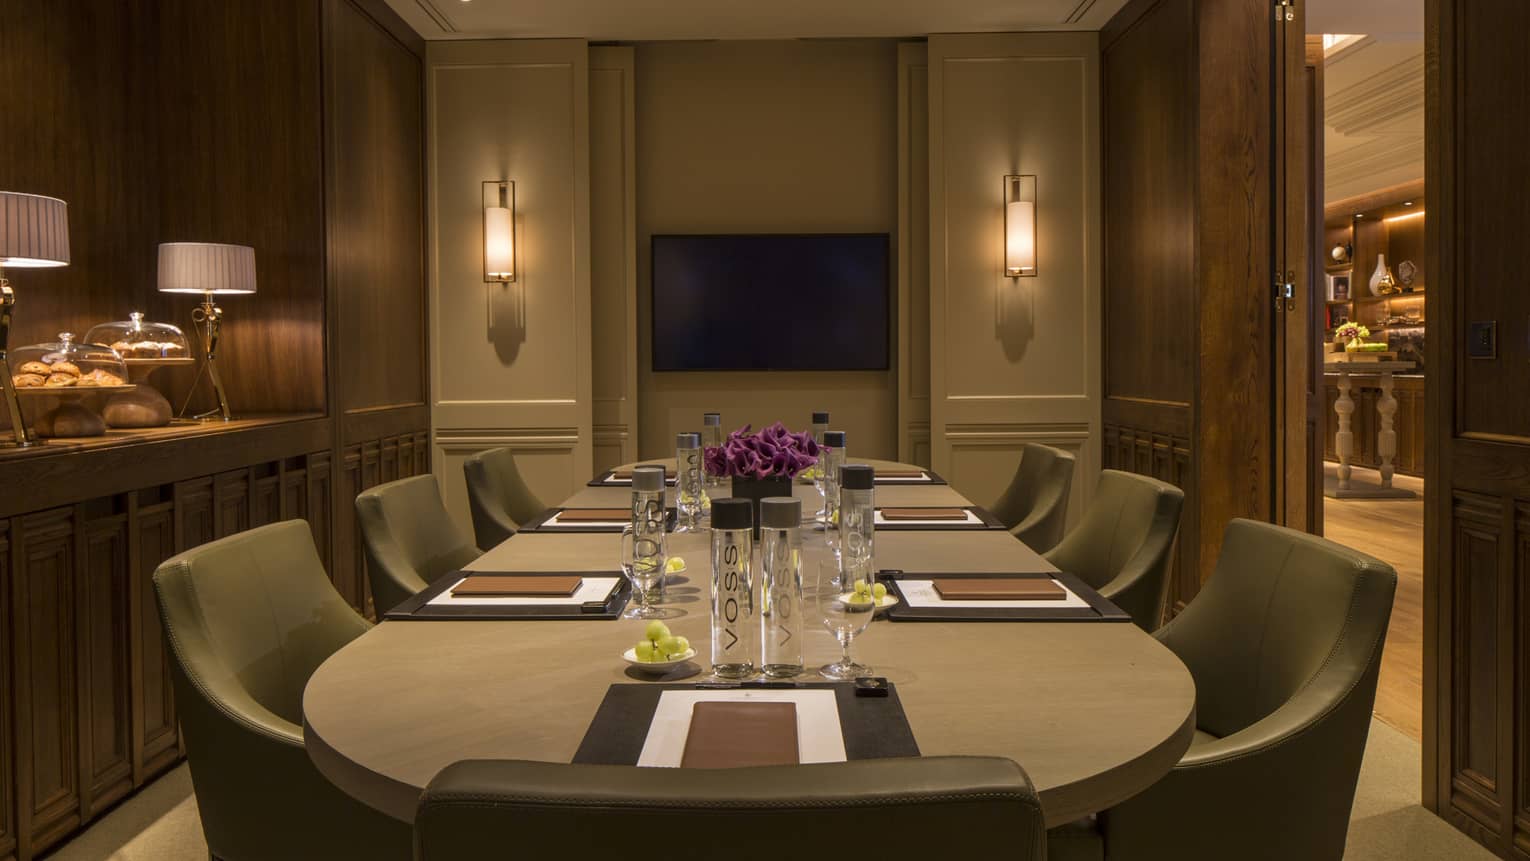 Ariel Meeting Room, large round boardroom table and modern chairs, low lighting